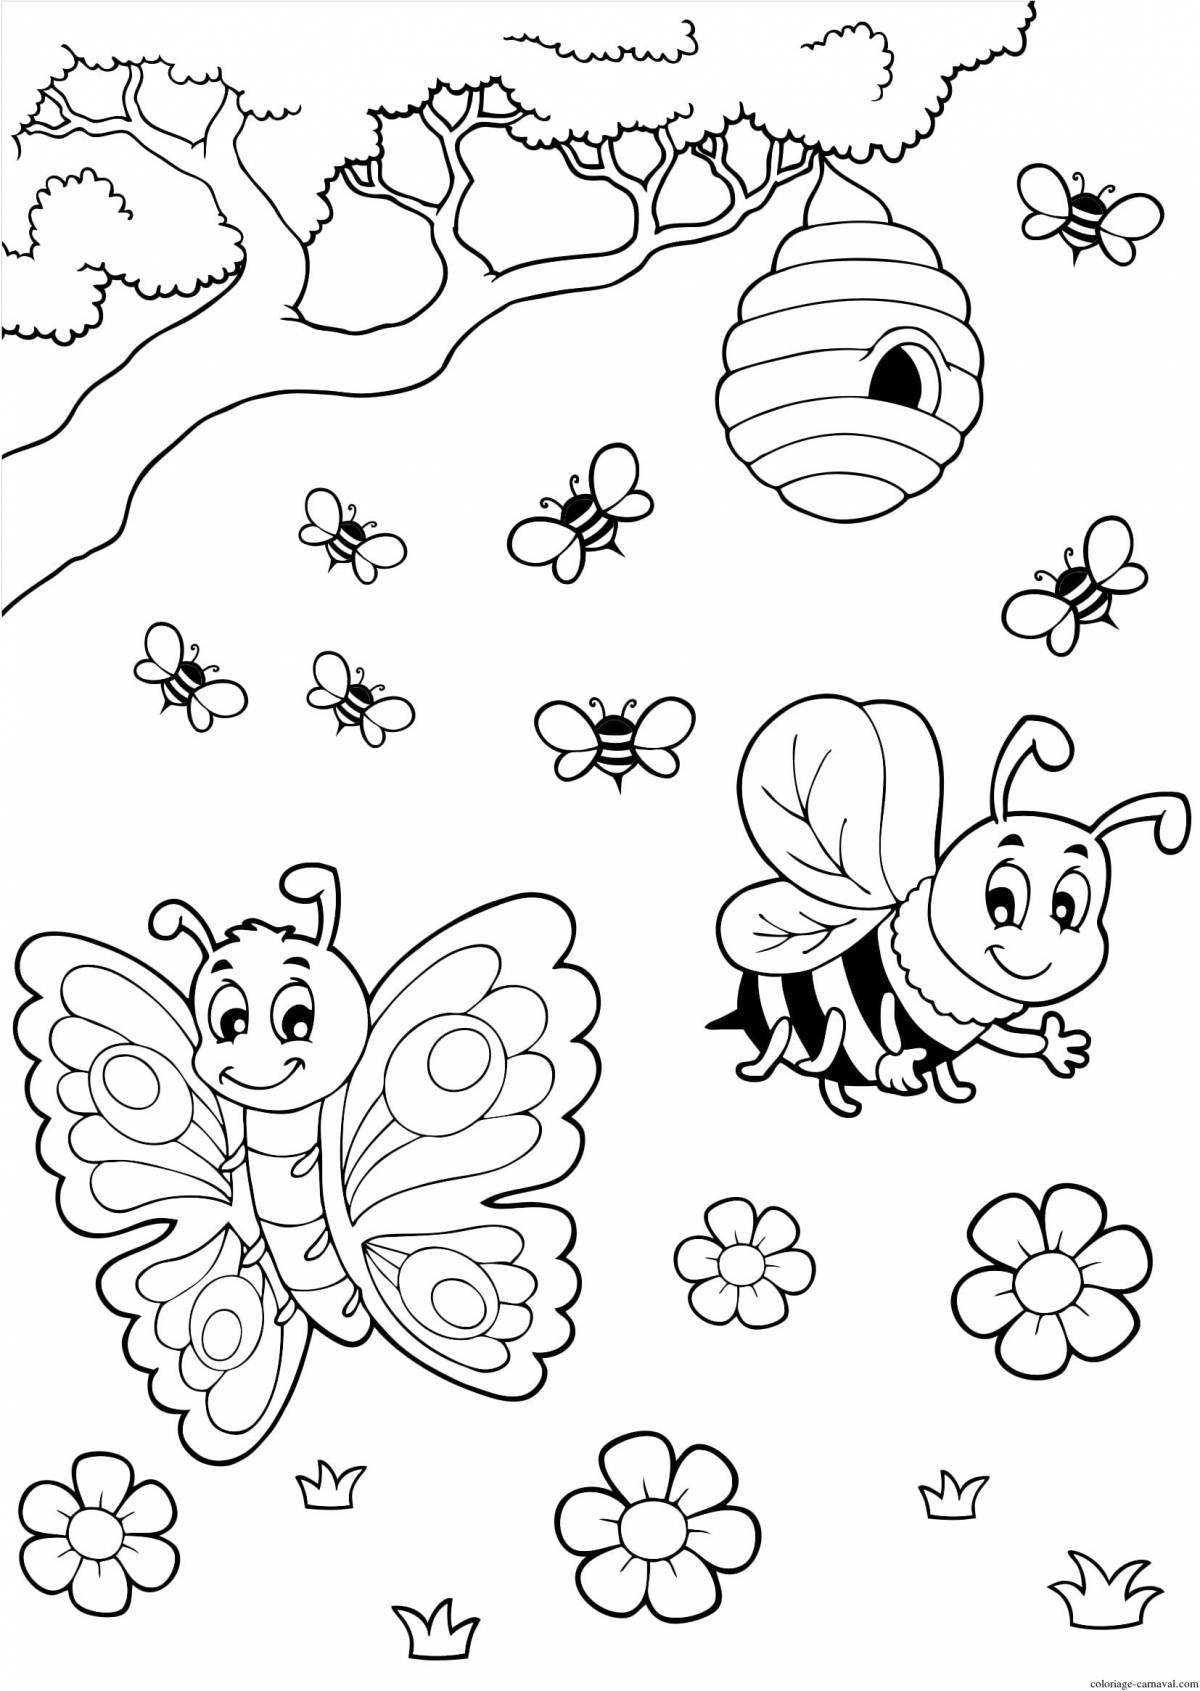 Insects for children 6 7 #1